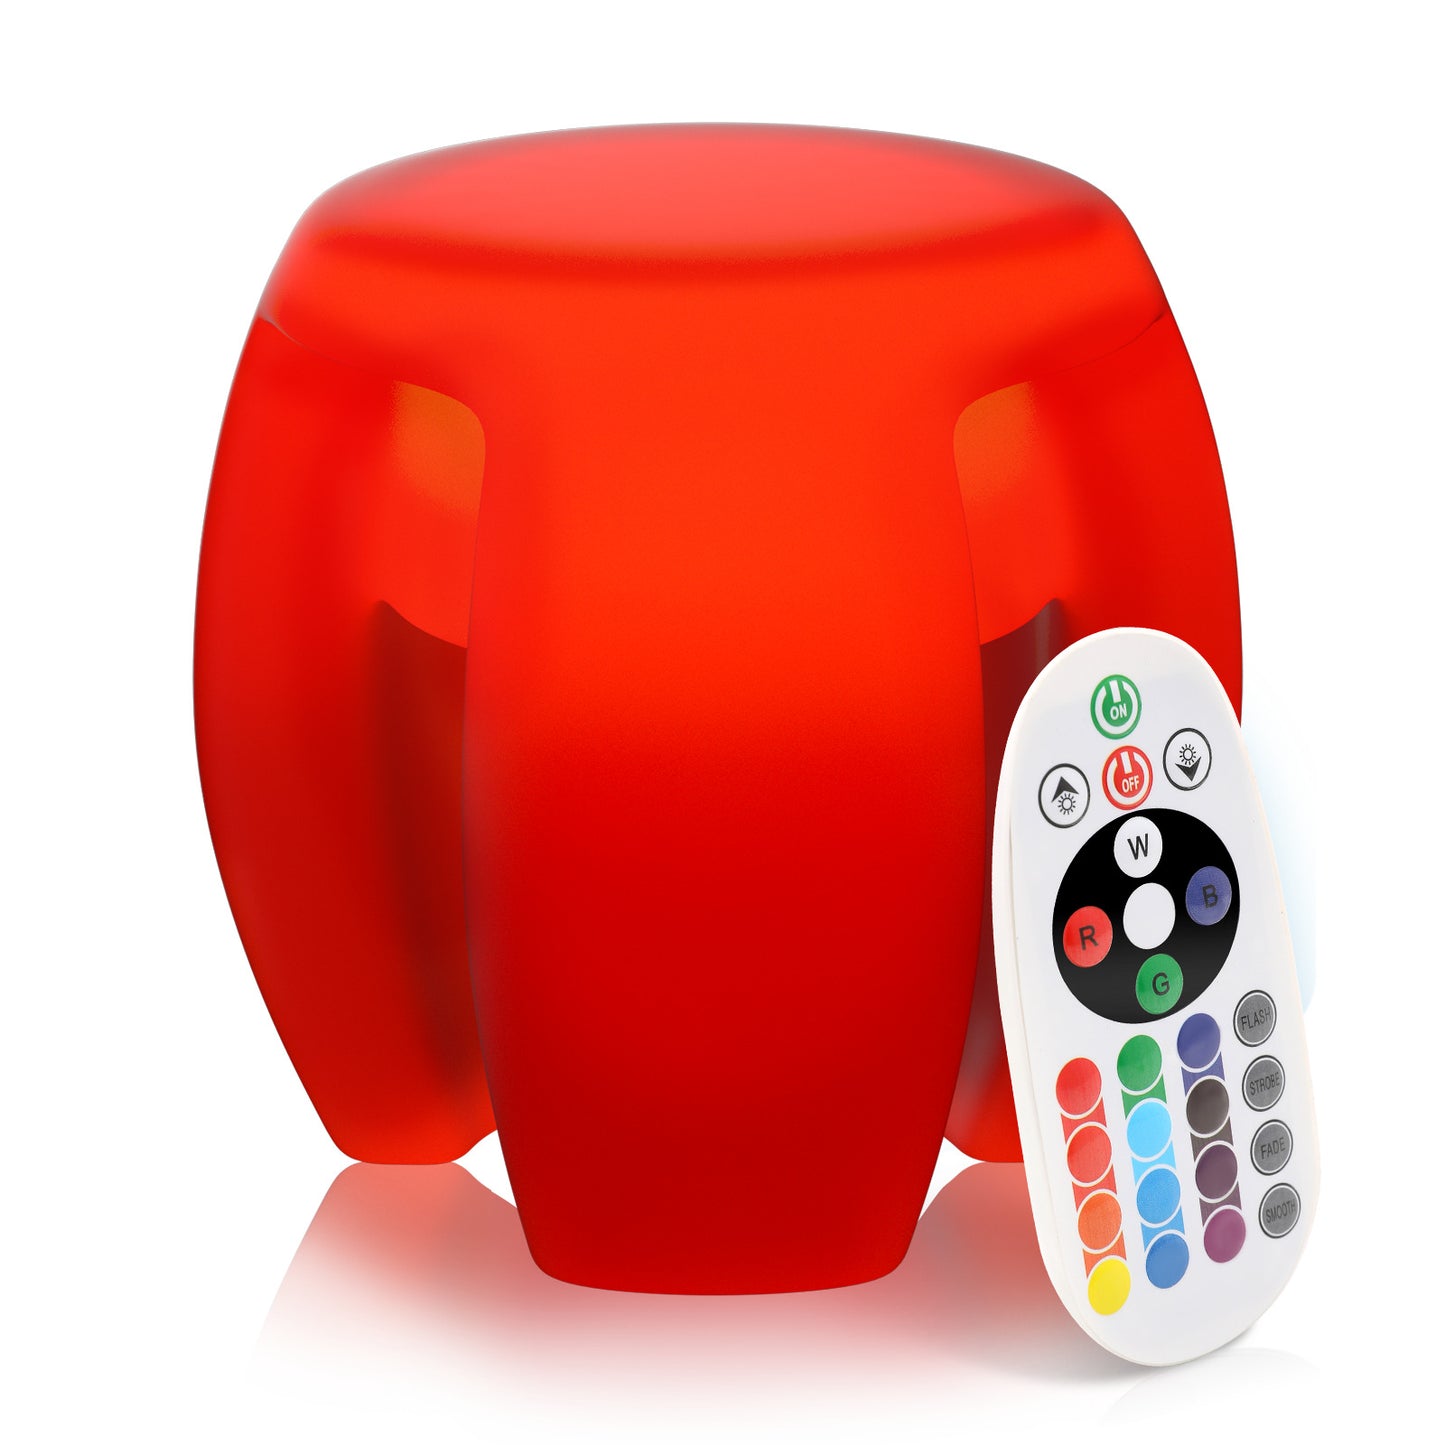 LED Bar Stool - 16 Colors Changing - with Remote Control